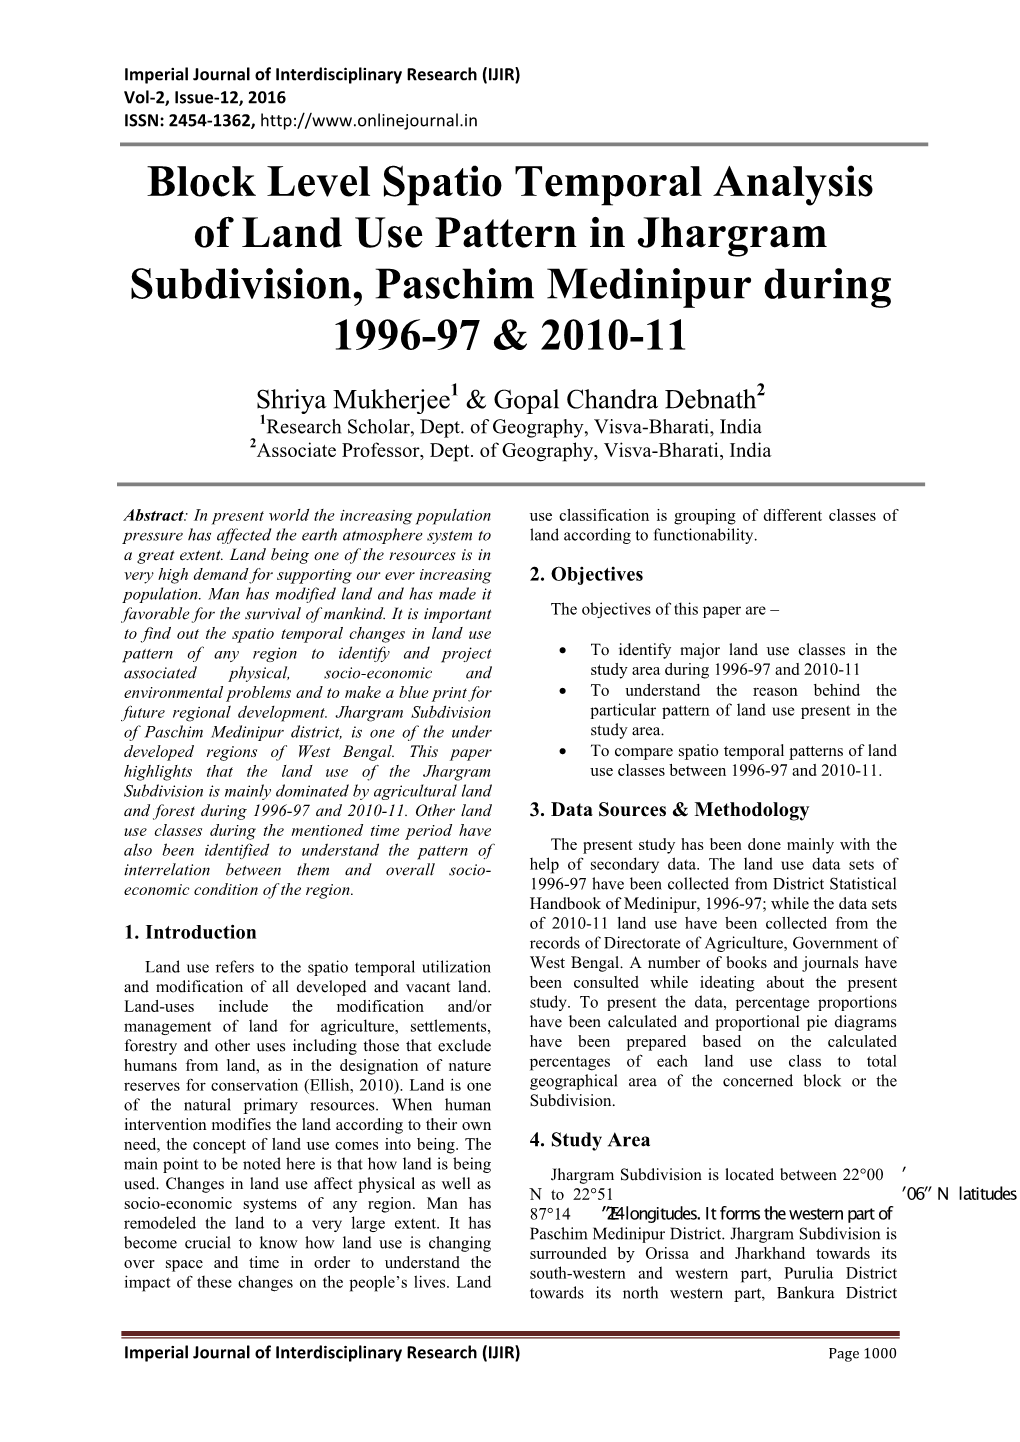 Block Level Spatio Temporal Analysis of Land Use Pattern in Jhargram Subdivision, Paschim Medinipur During 1996-97 & 2010-11